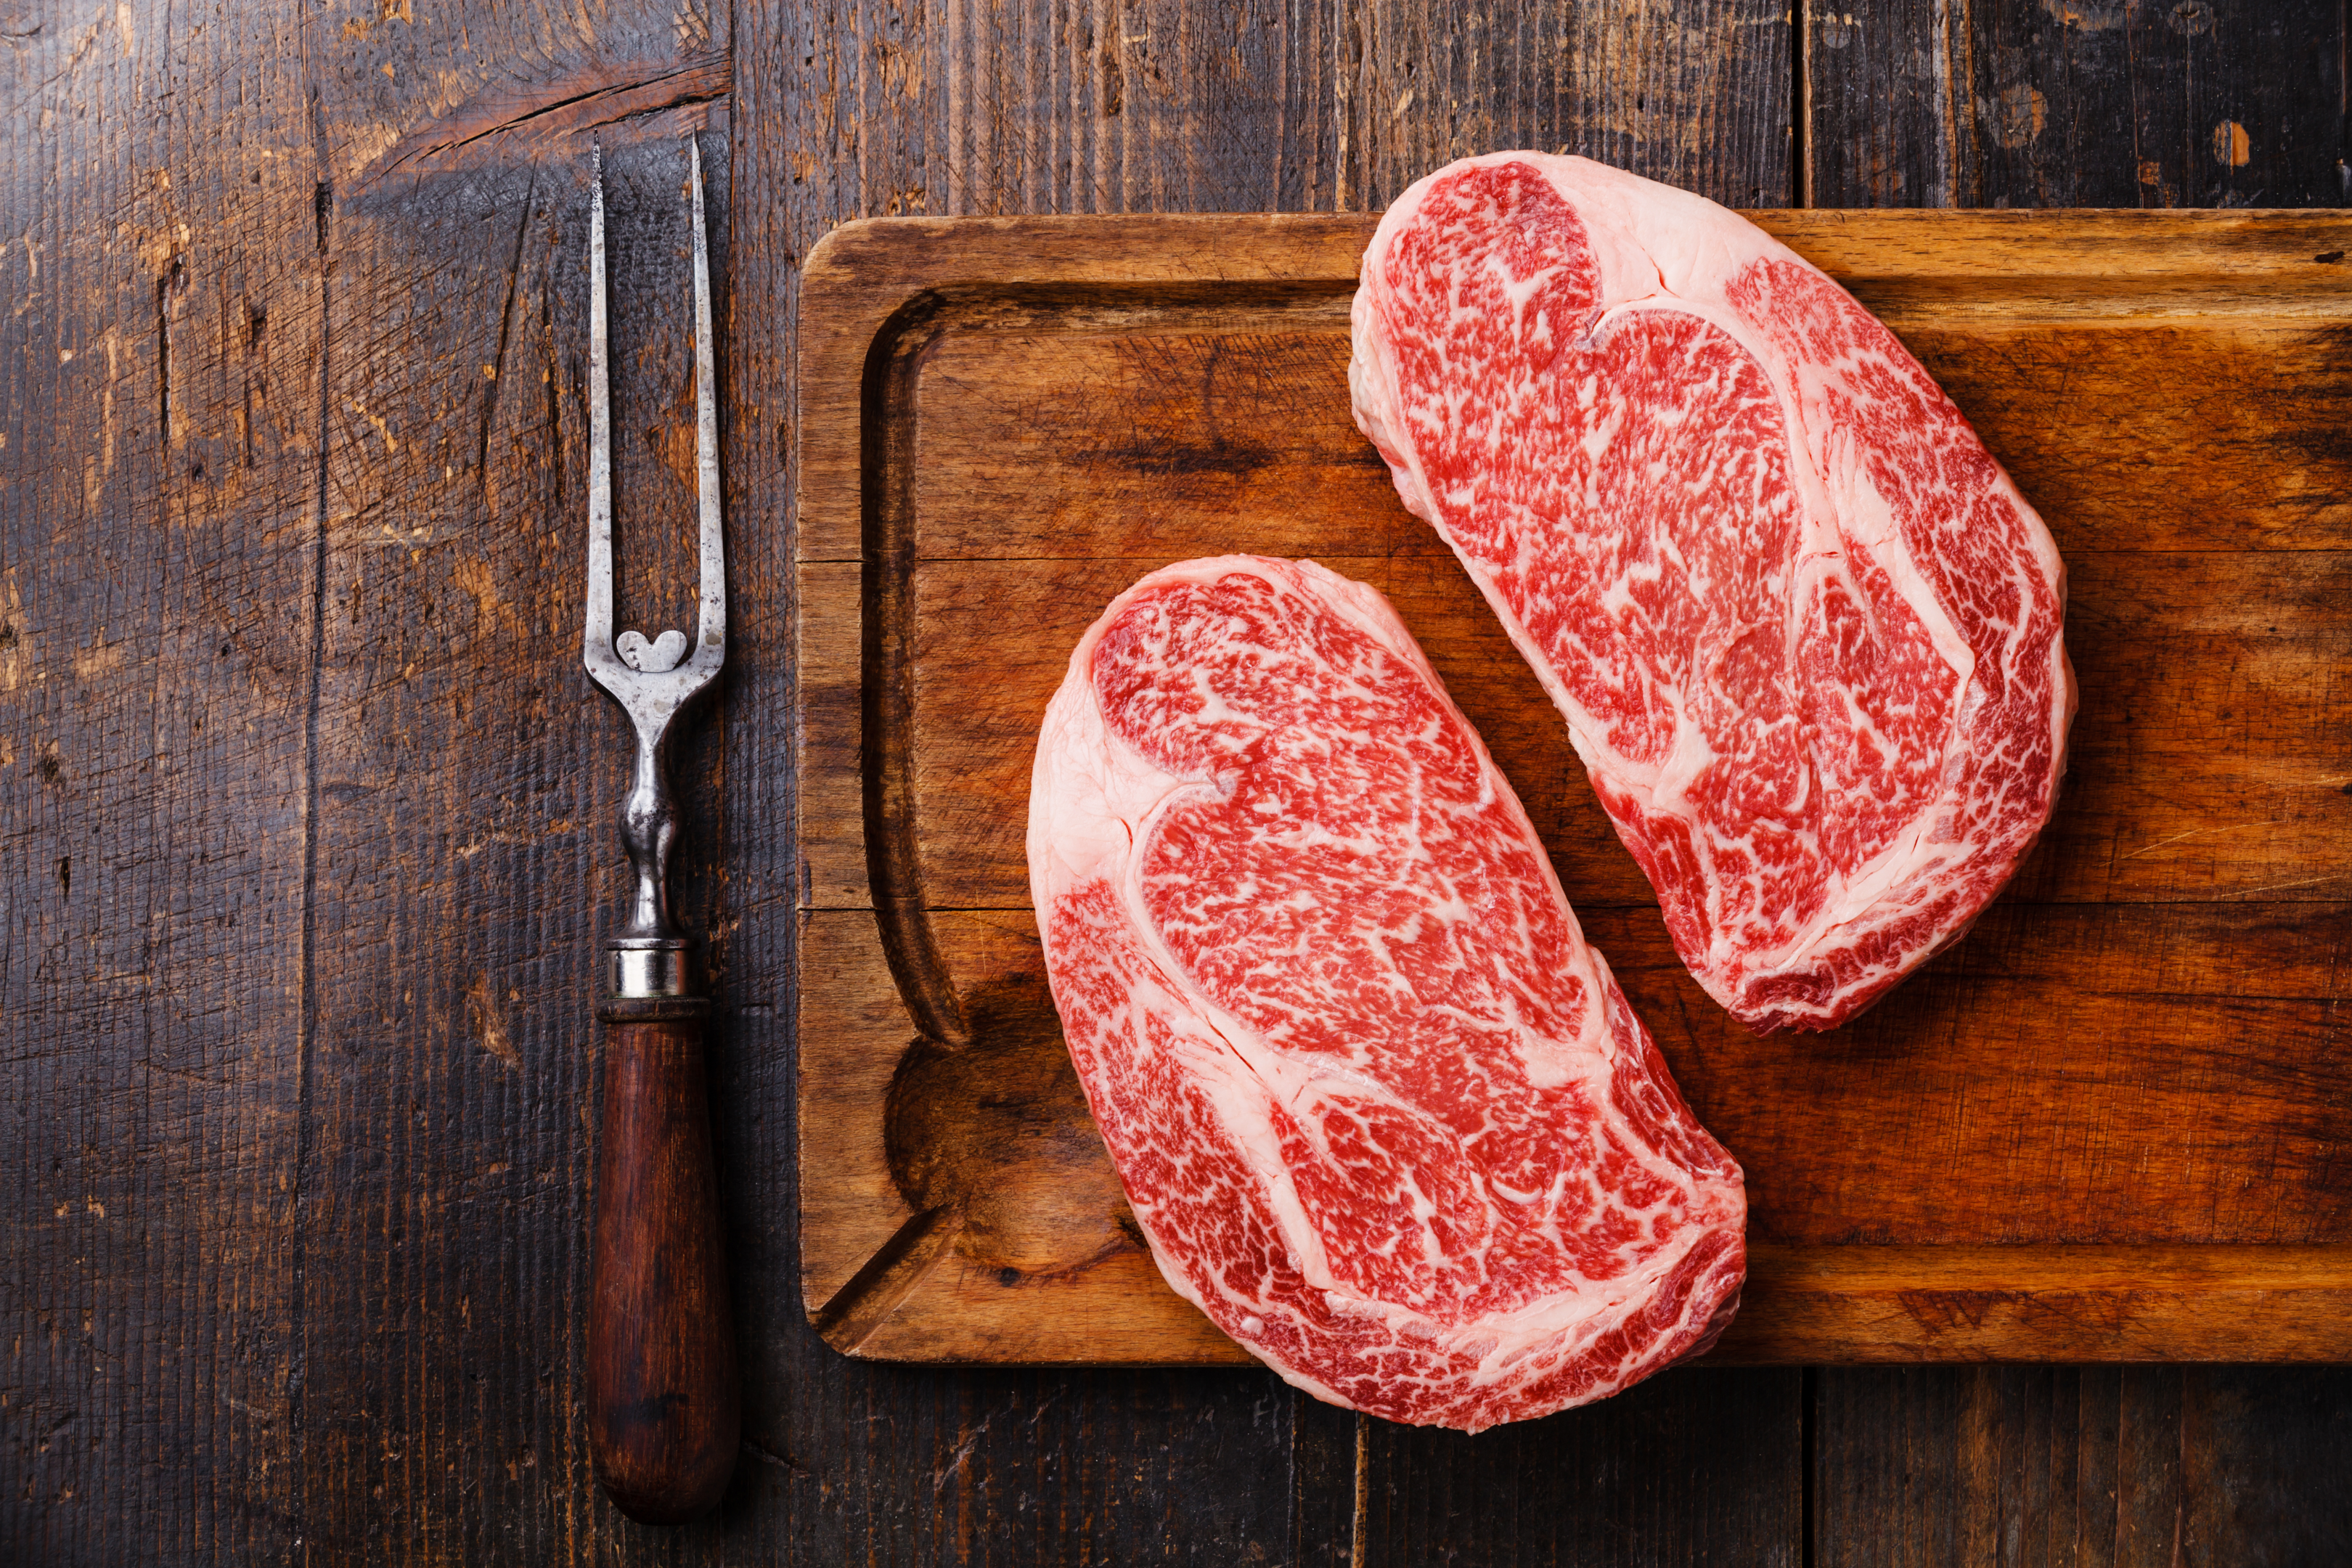 The beef industry grading system like the USDA Prime grade